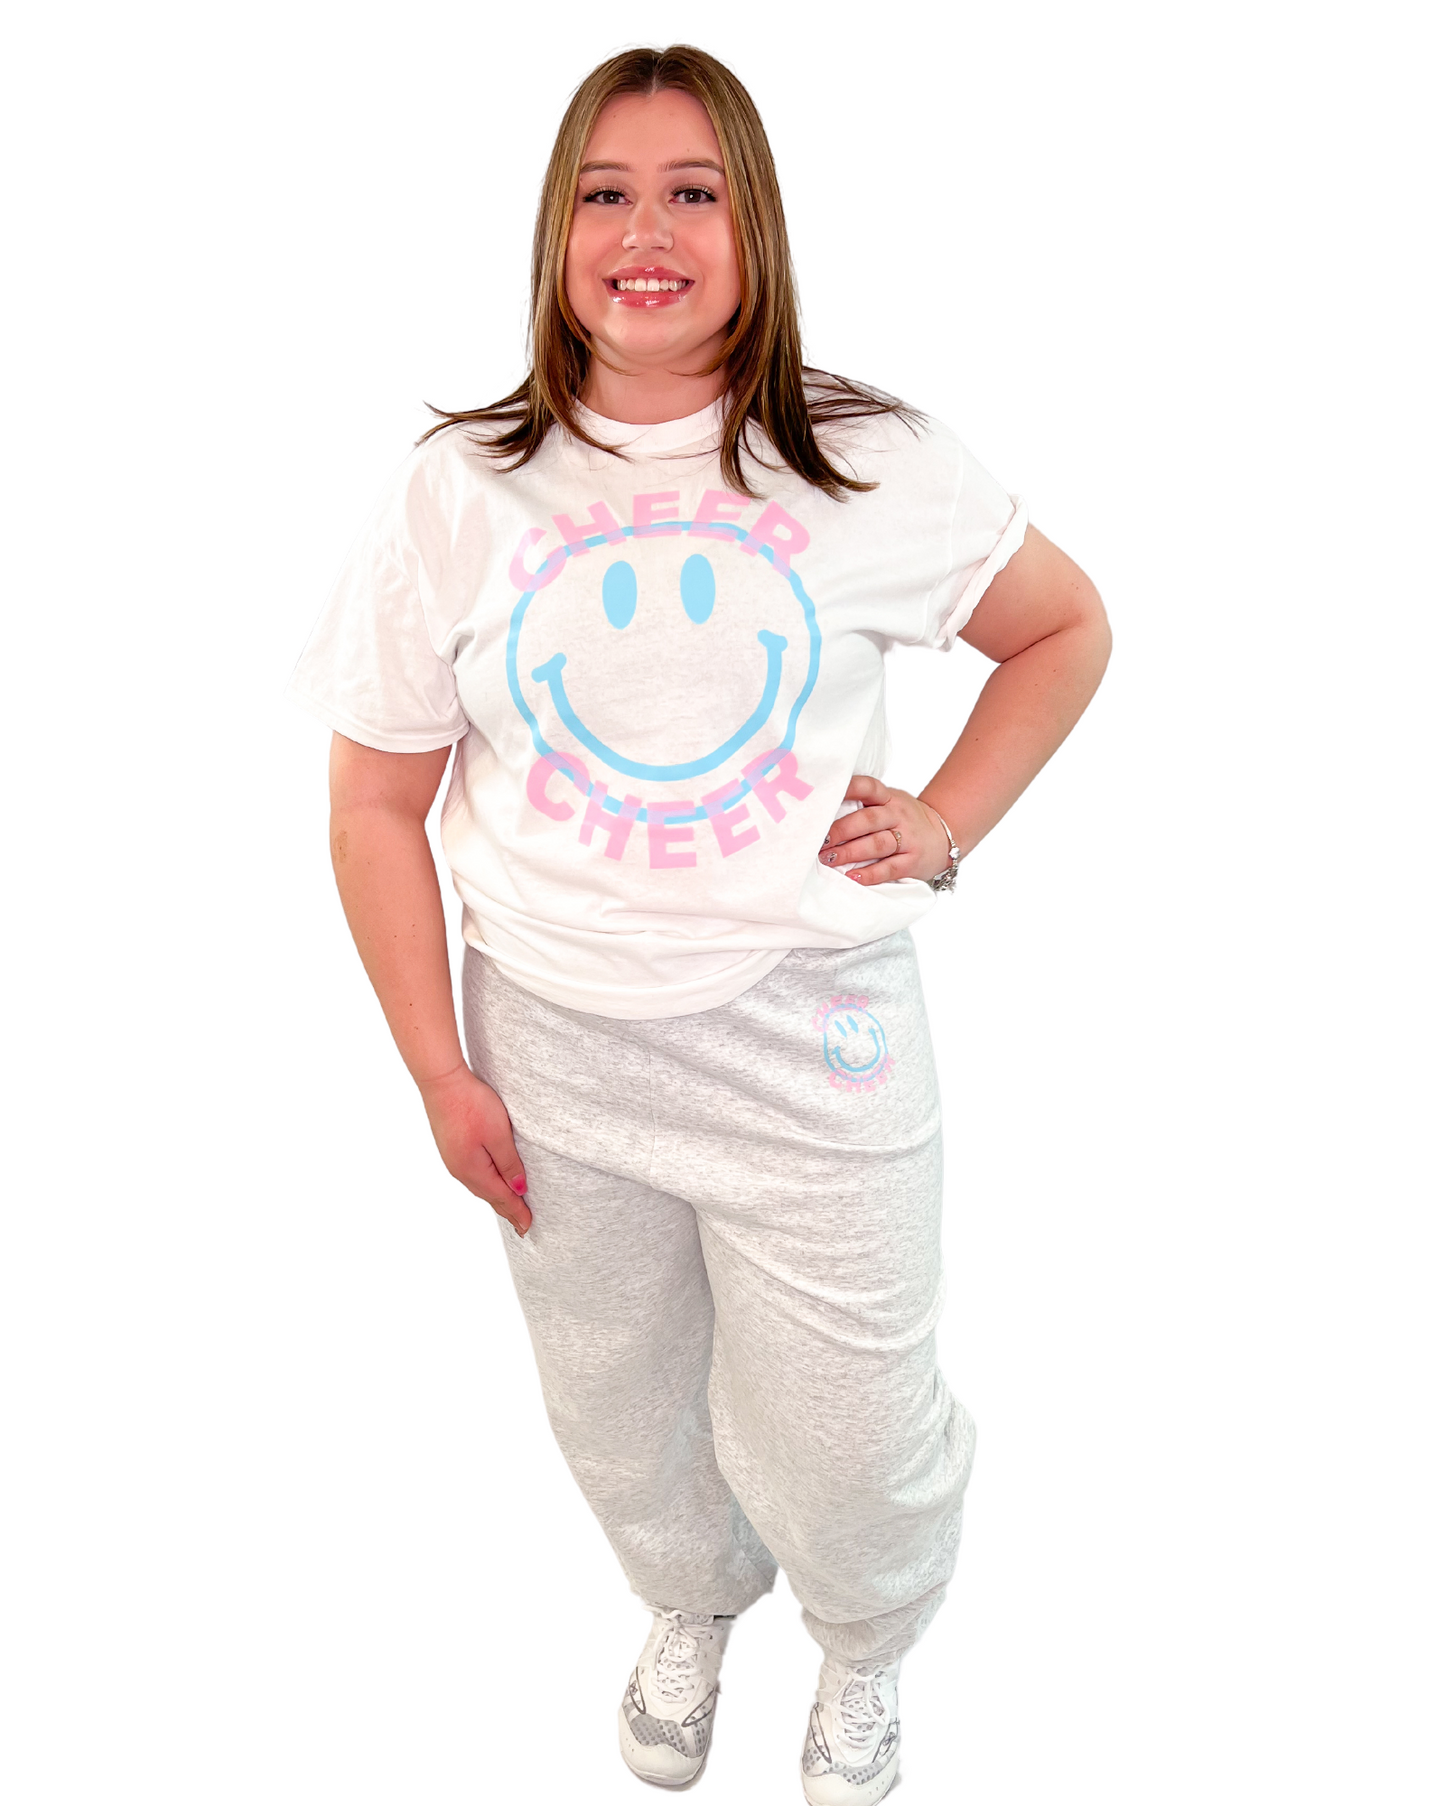 Cheer Smile Joggers